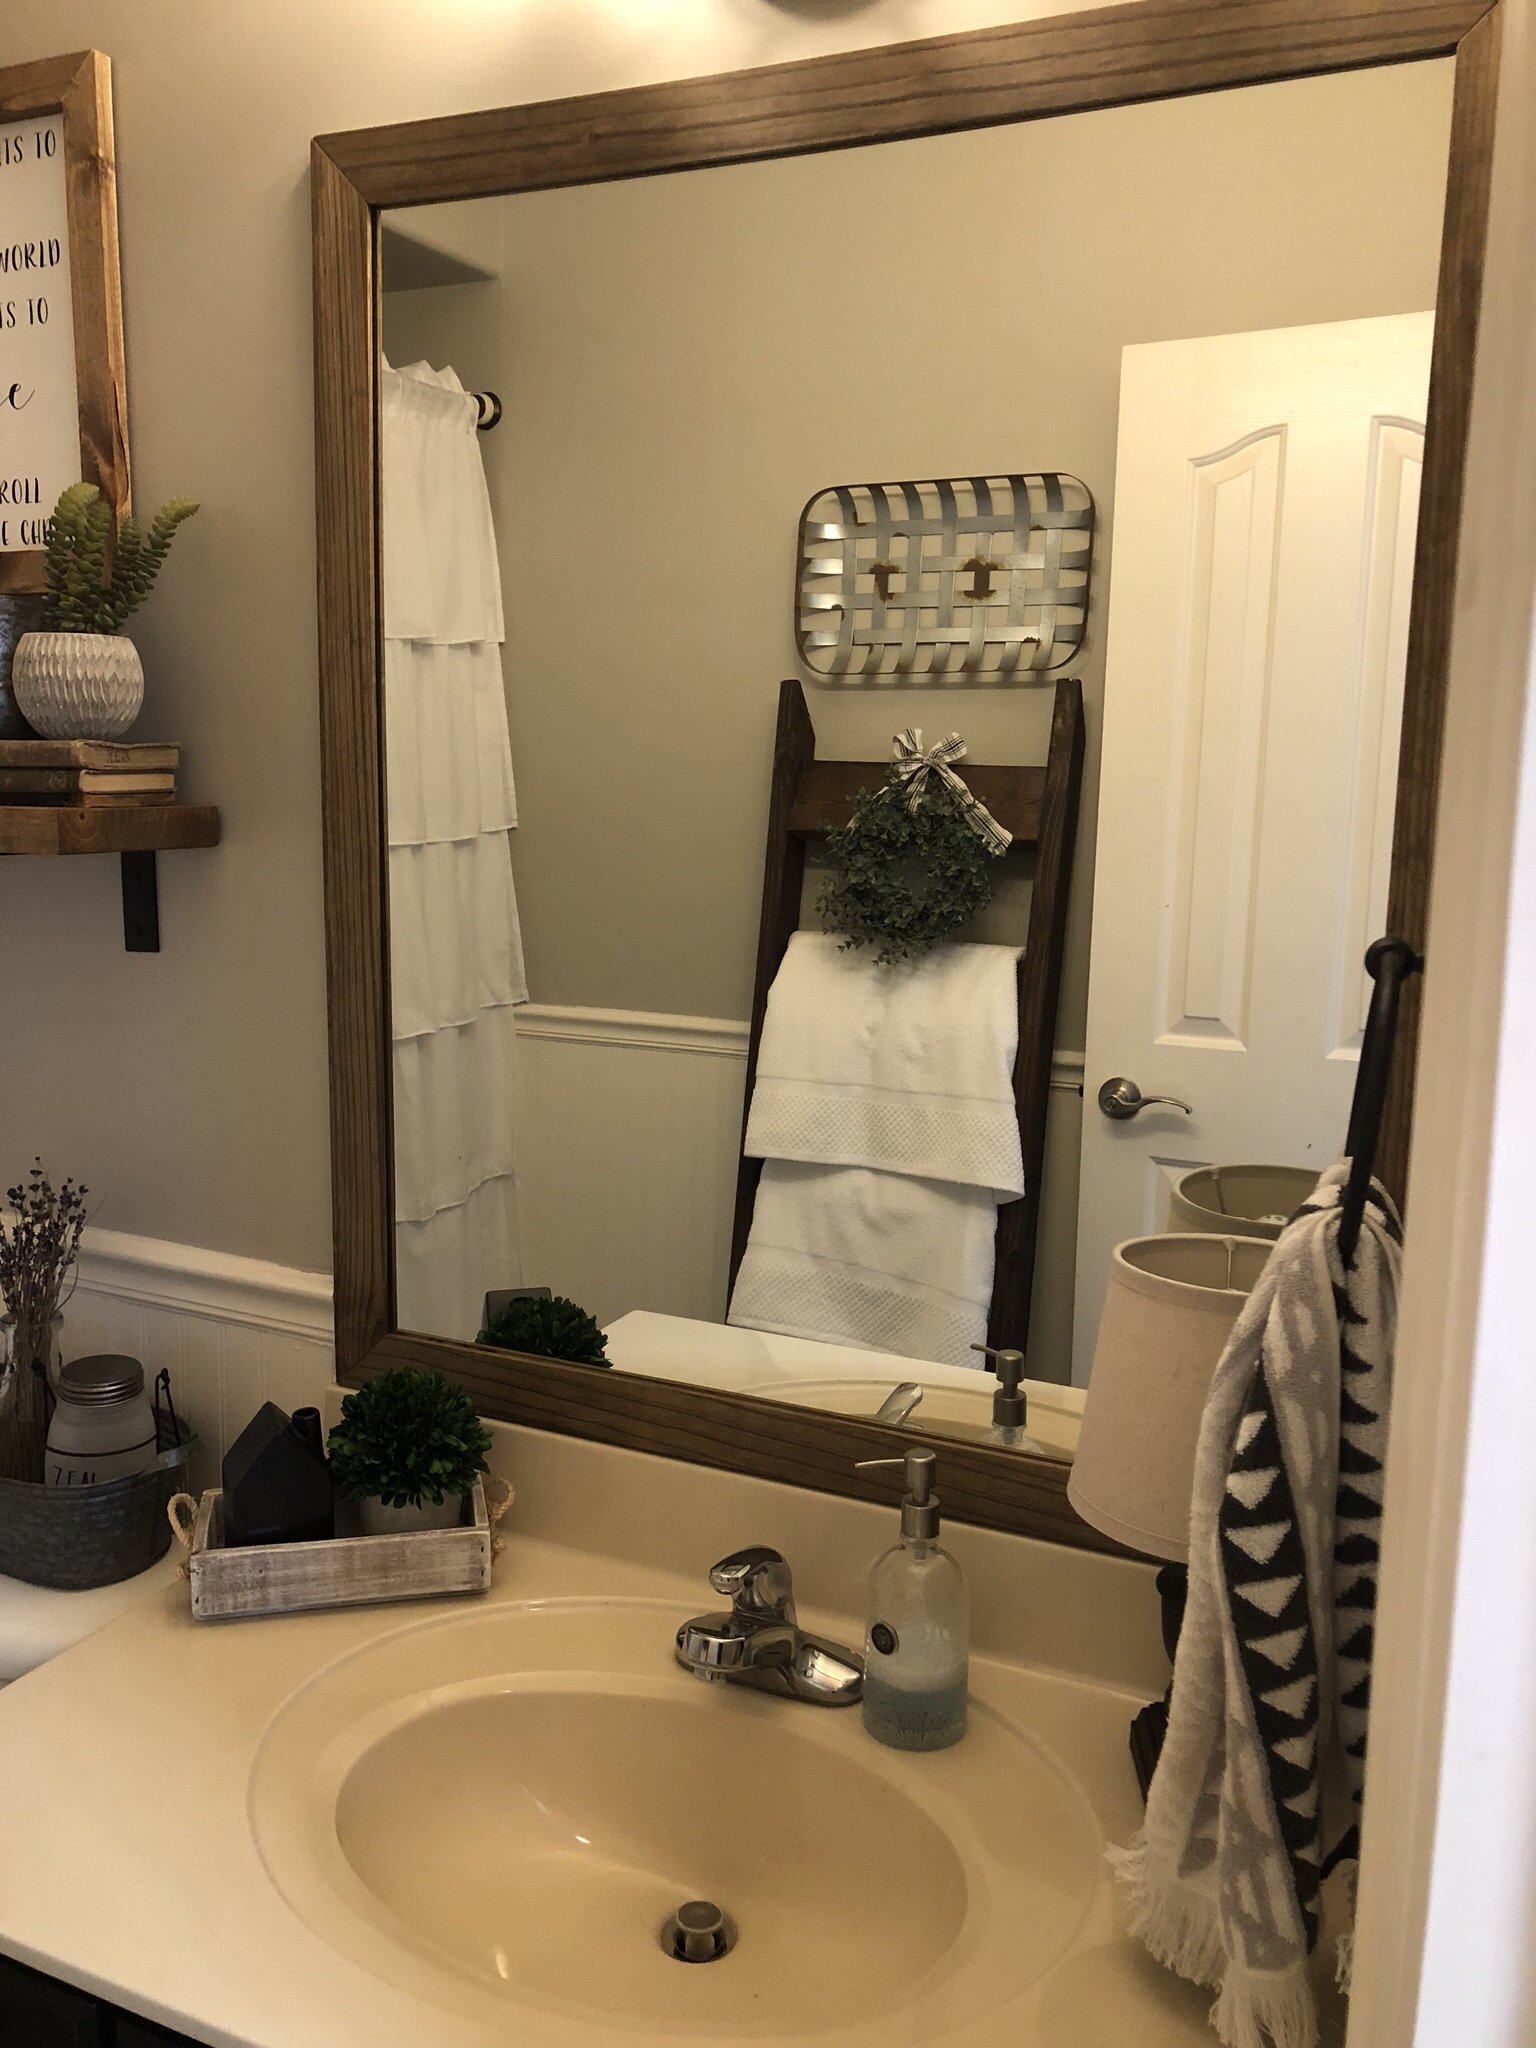 Framing out your mirror…the cheap and easy DIY way!